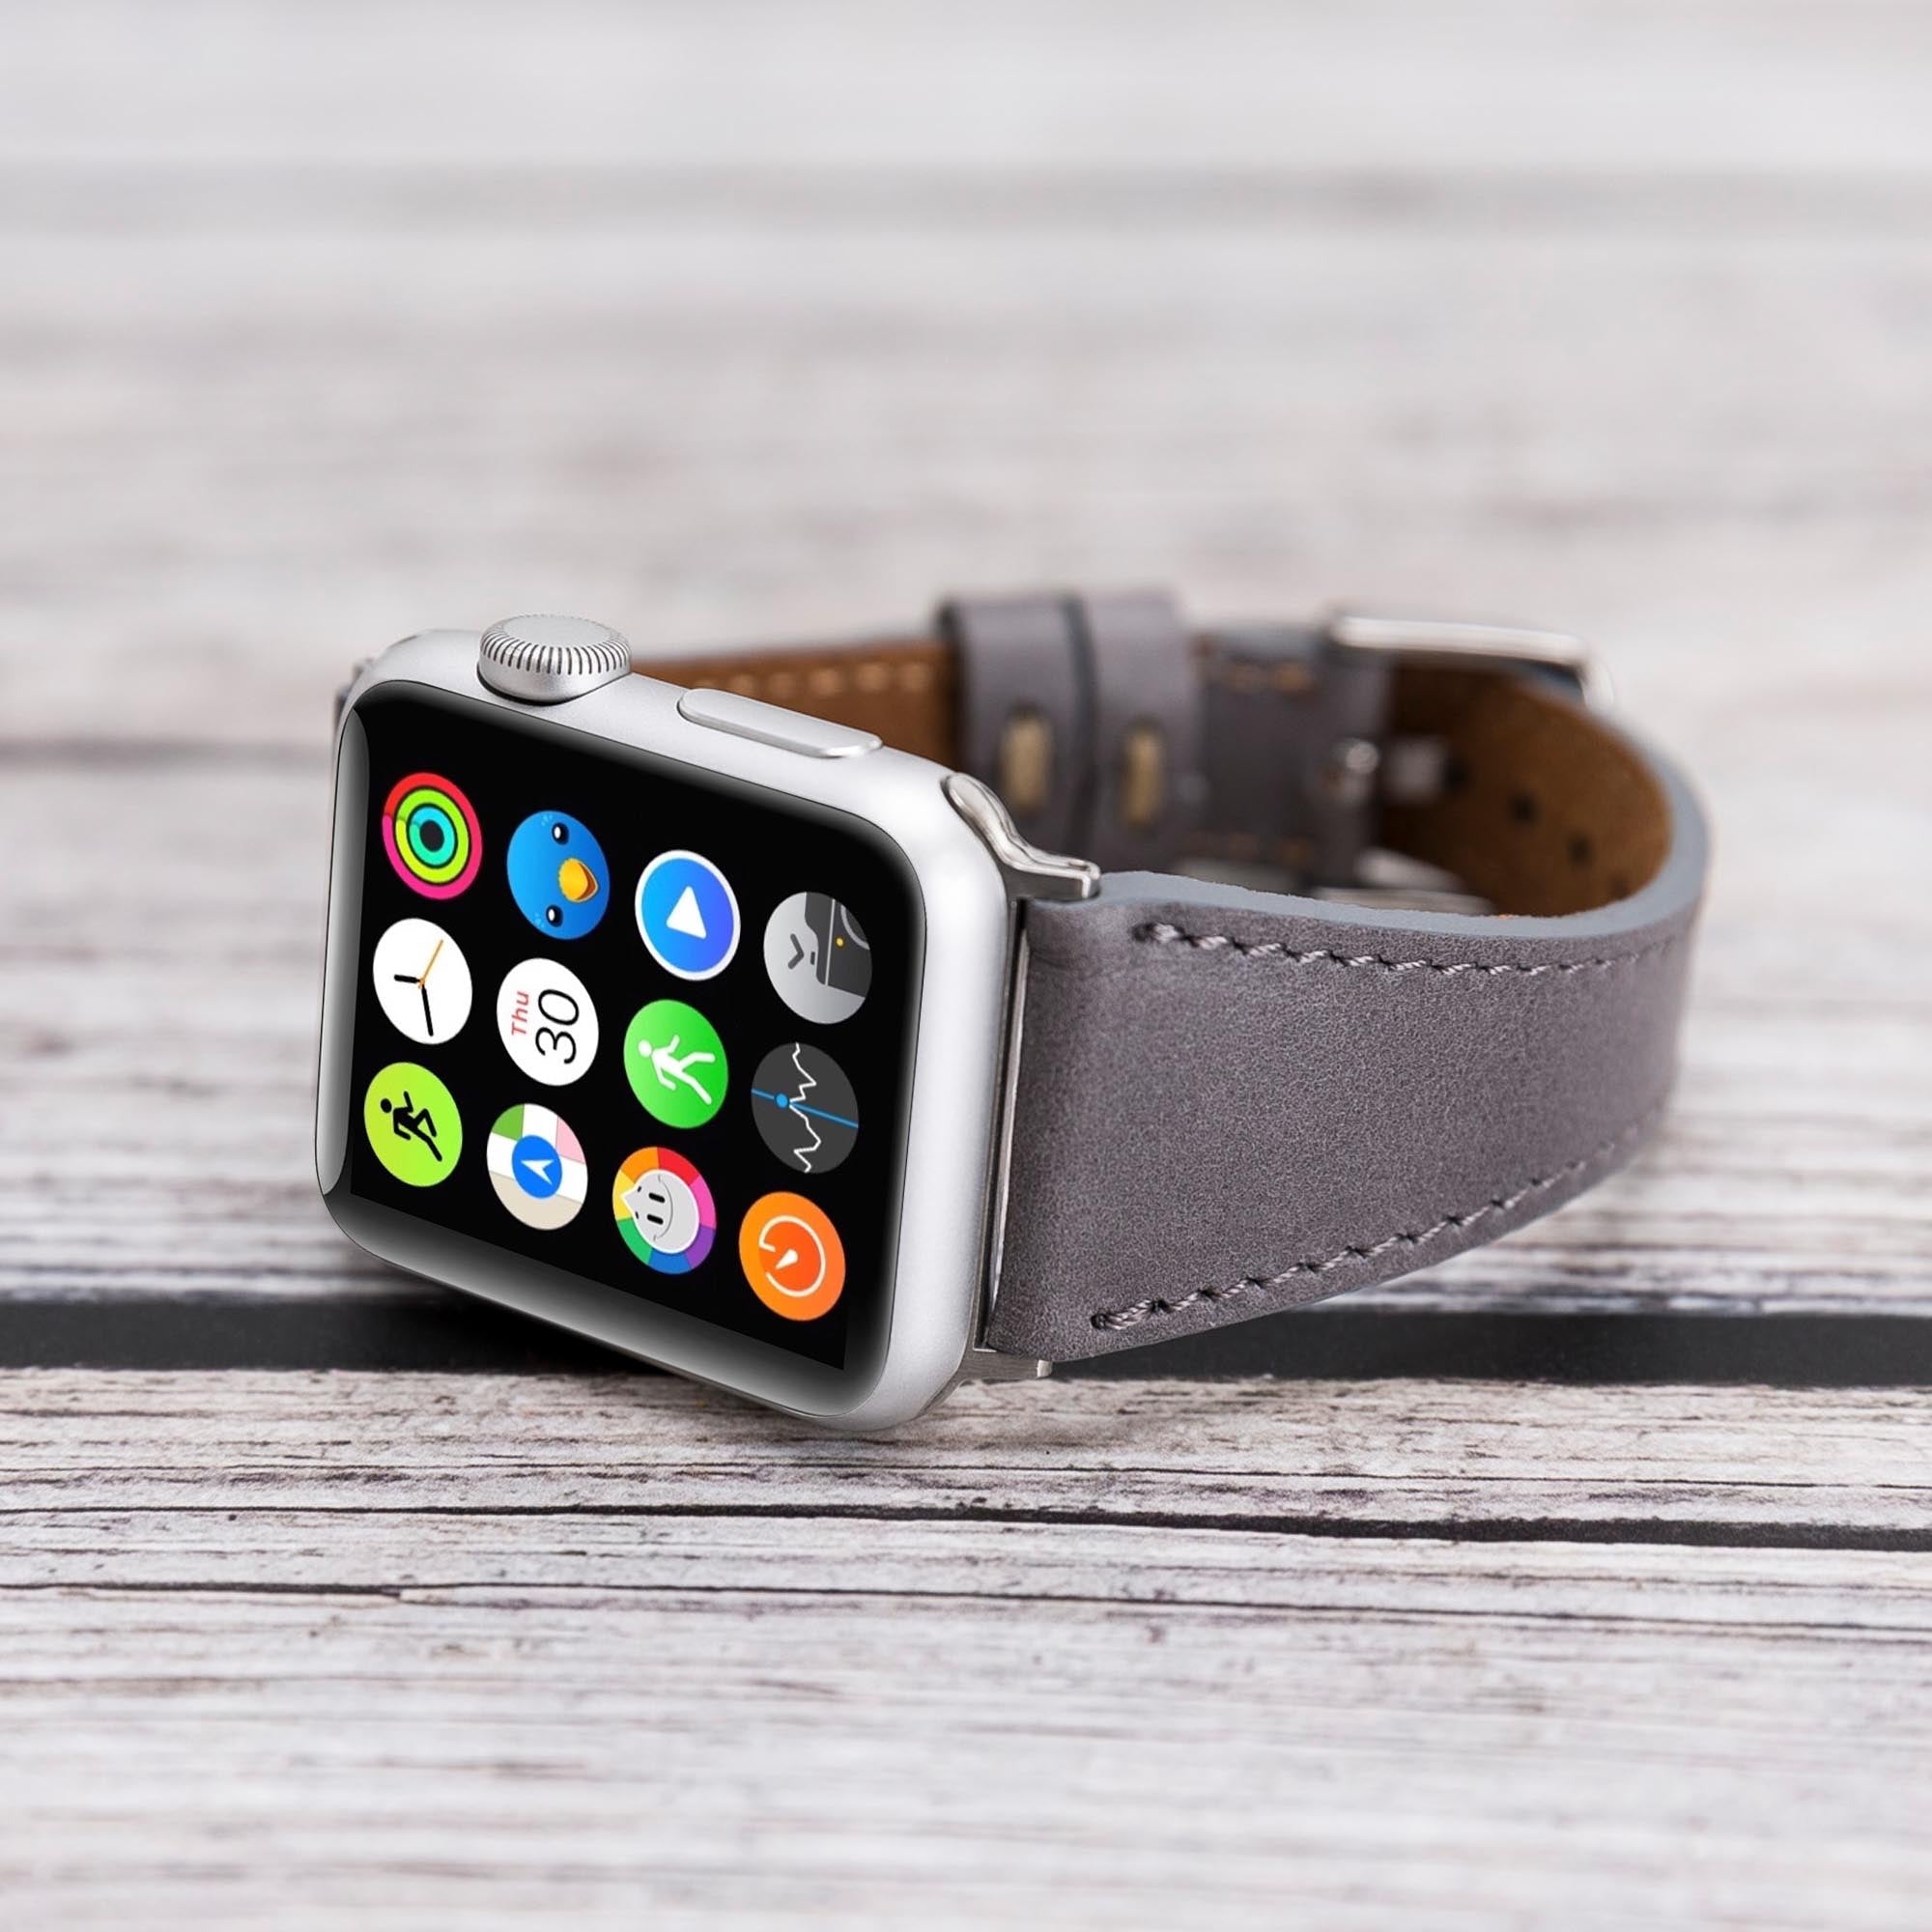 Slim Strap - Full Grain Leather Band for Apple Watch 38mm / 40mm - GRAY - saracleather